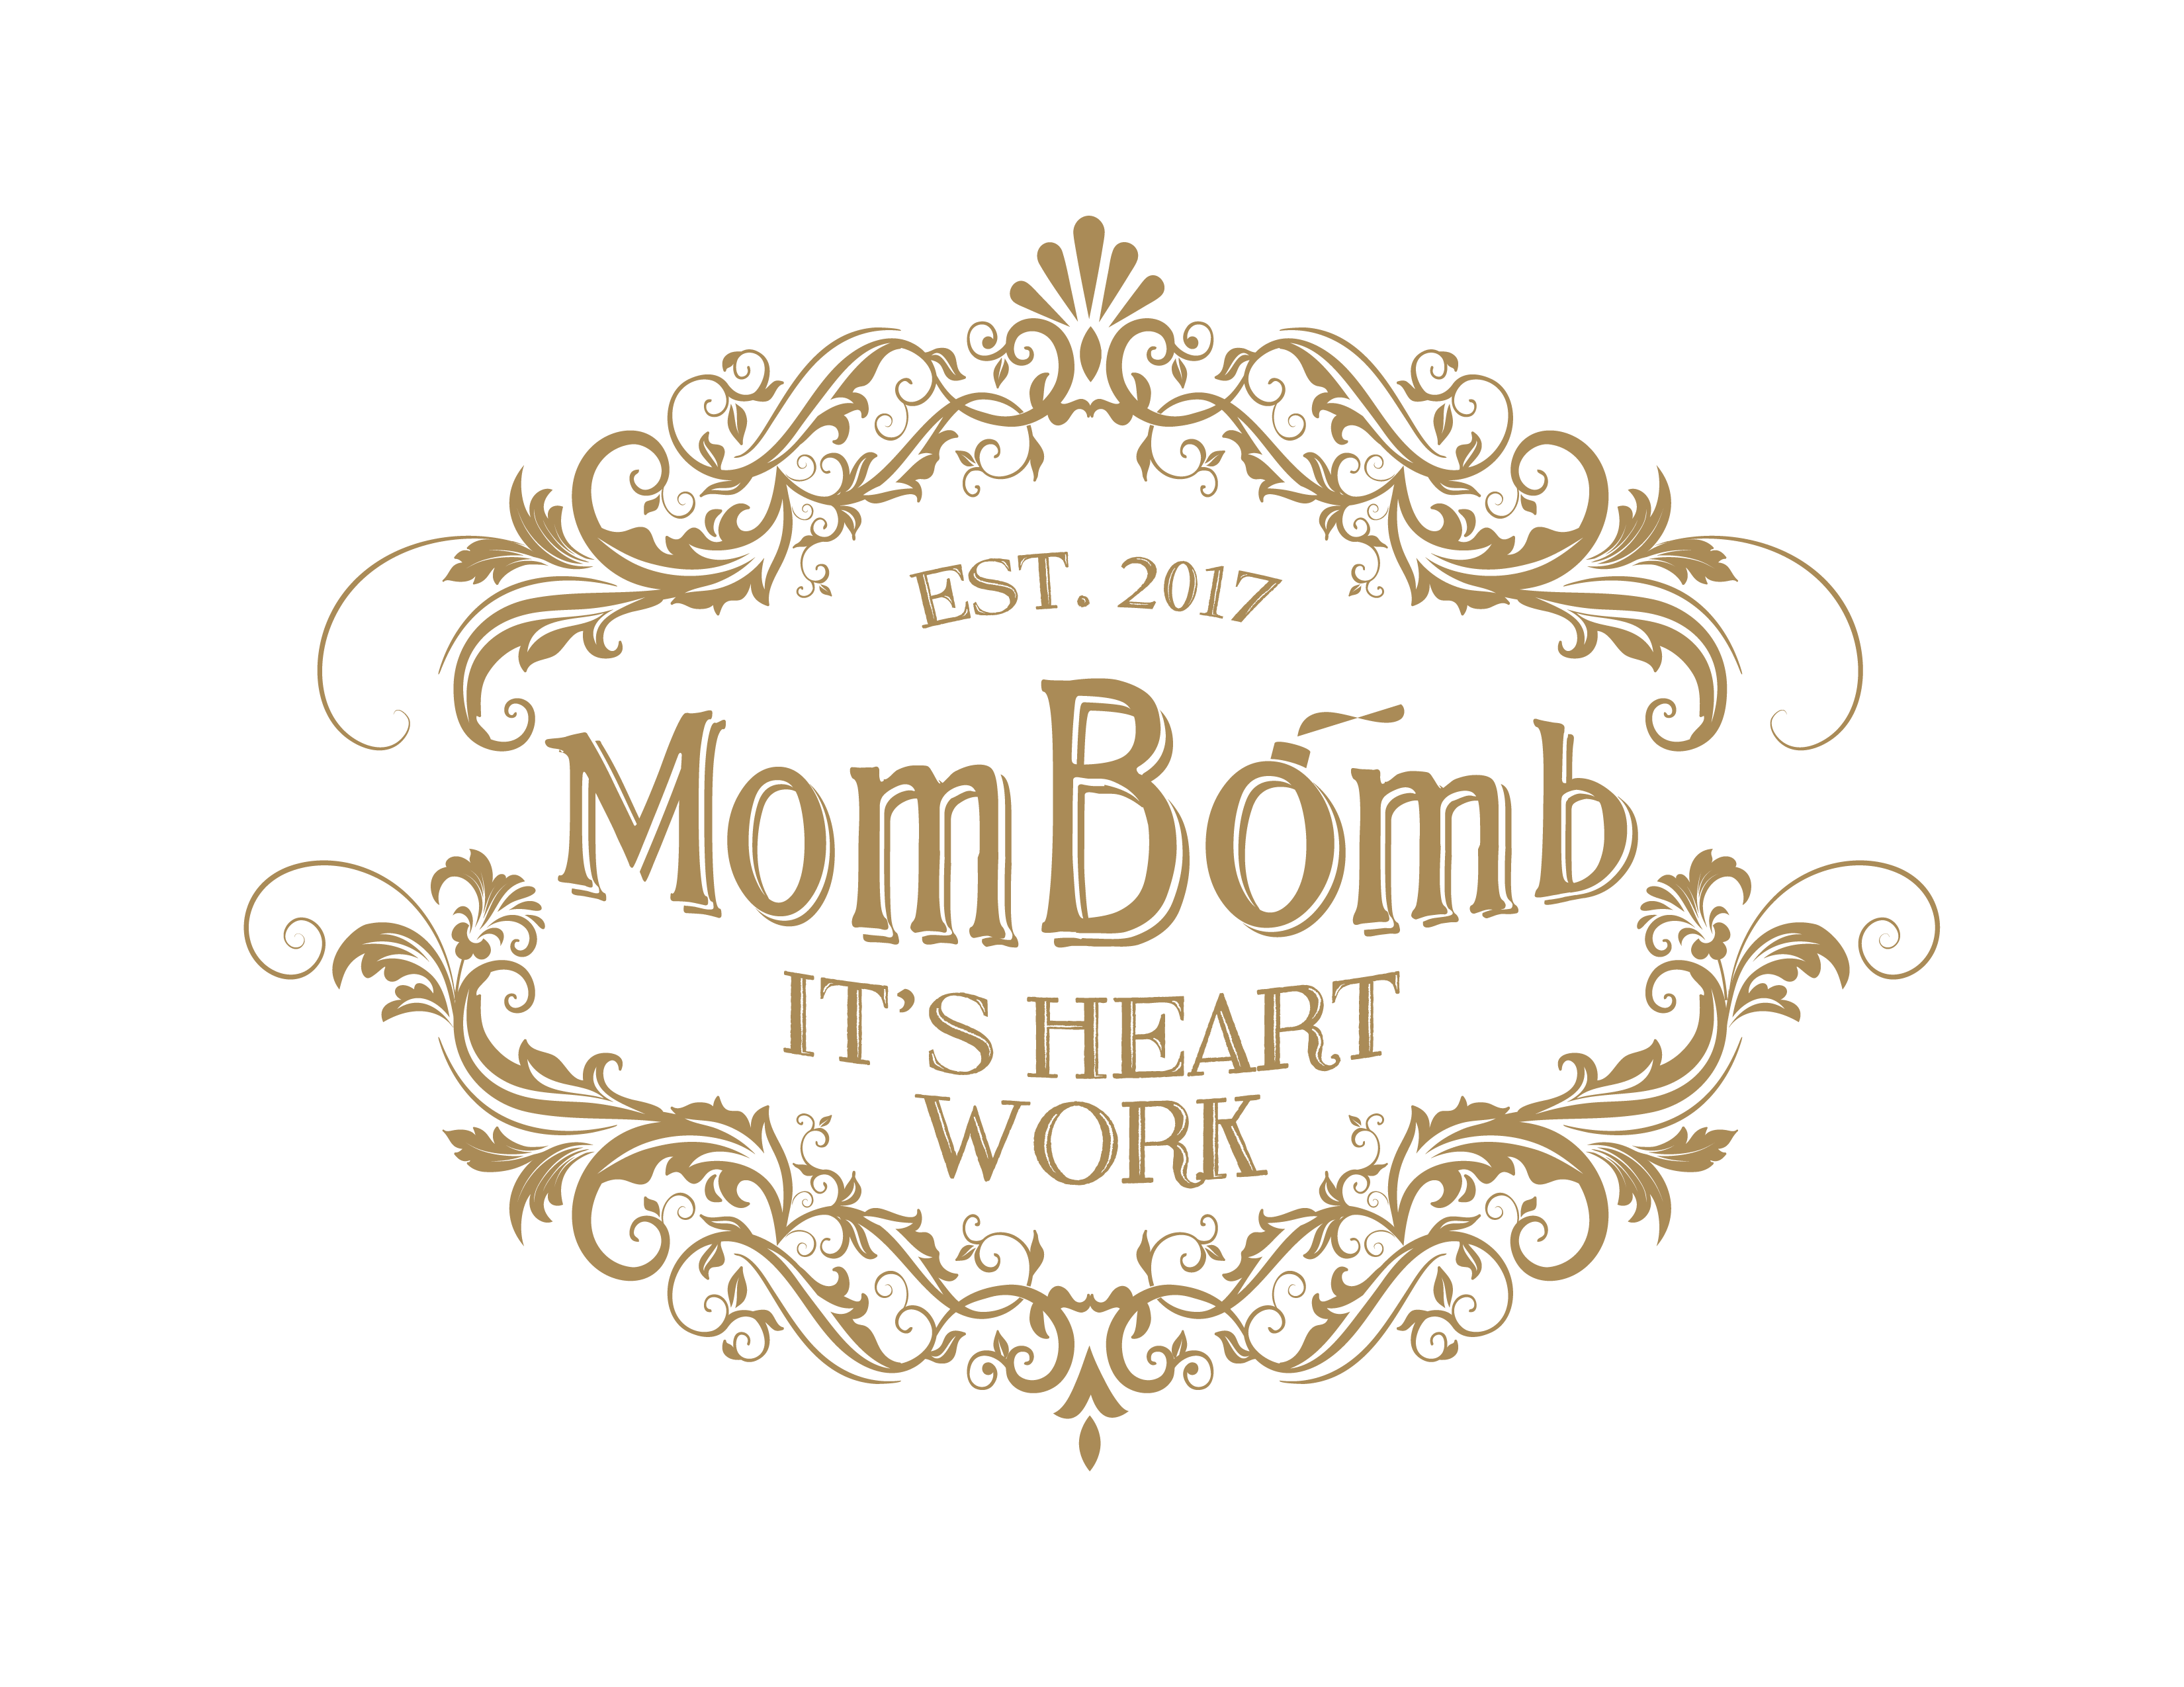 Mom Bomb Store including CBD Products Coupon Codes